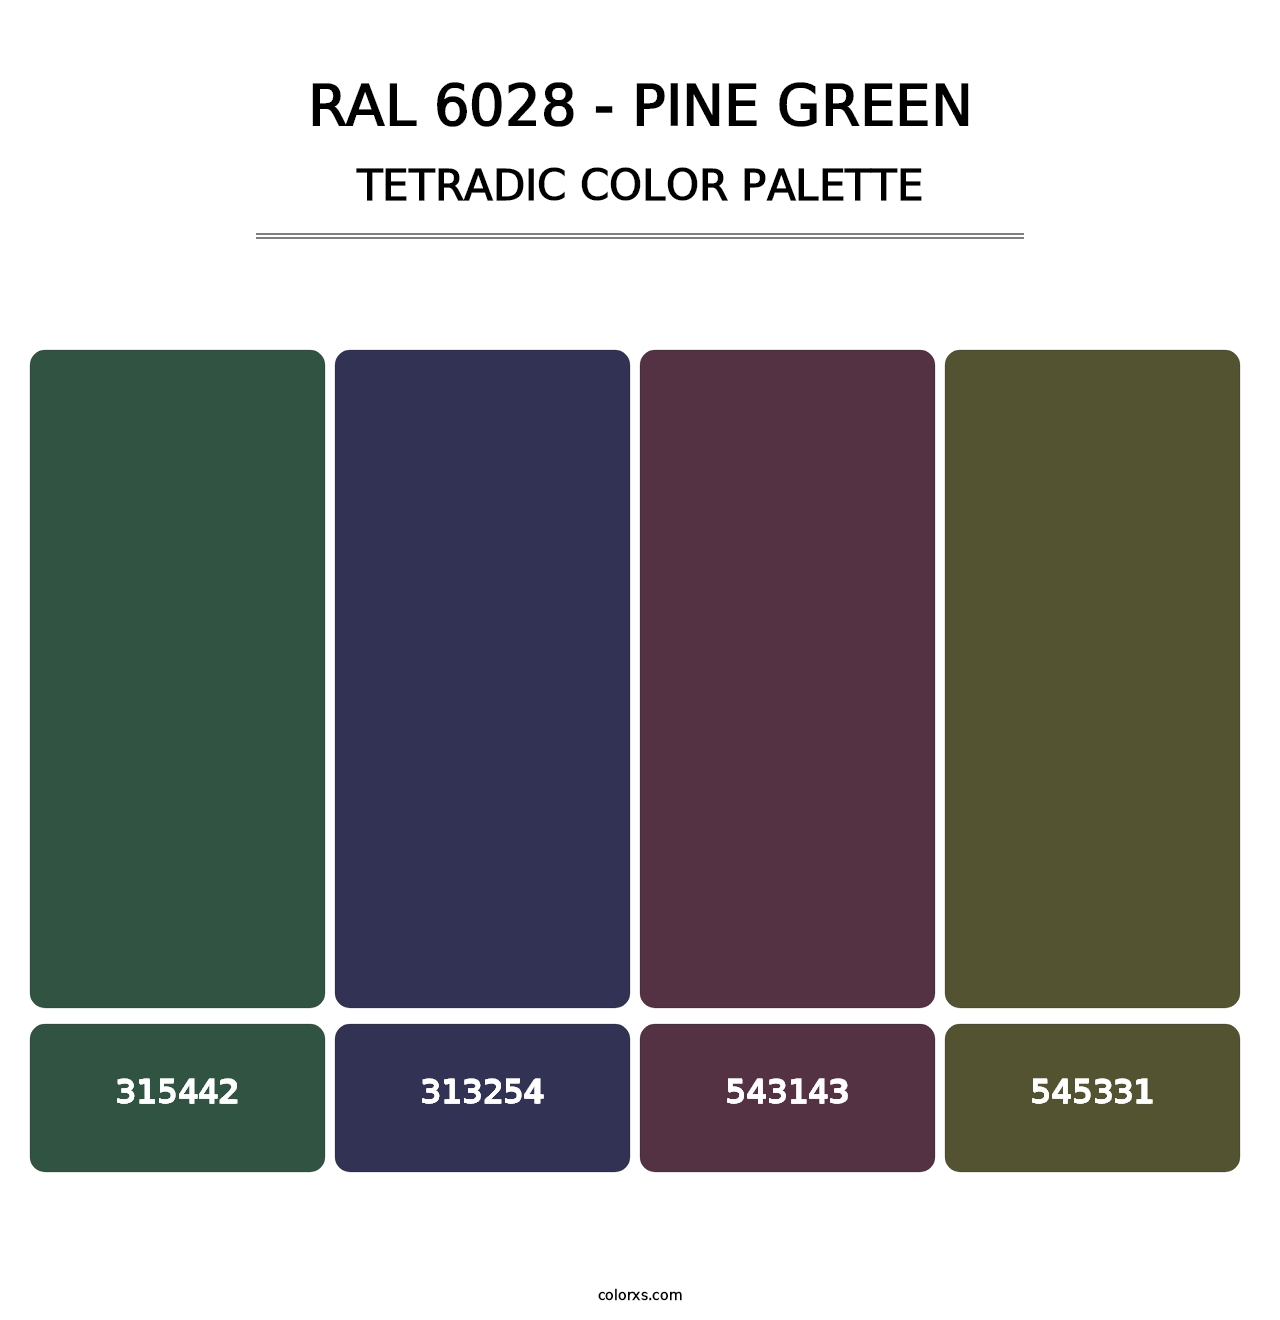 RAL 6028 - Pine Green - Tetradic Color Palette